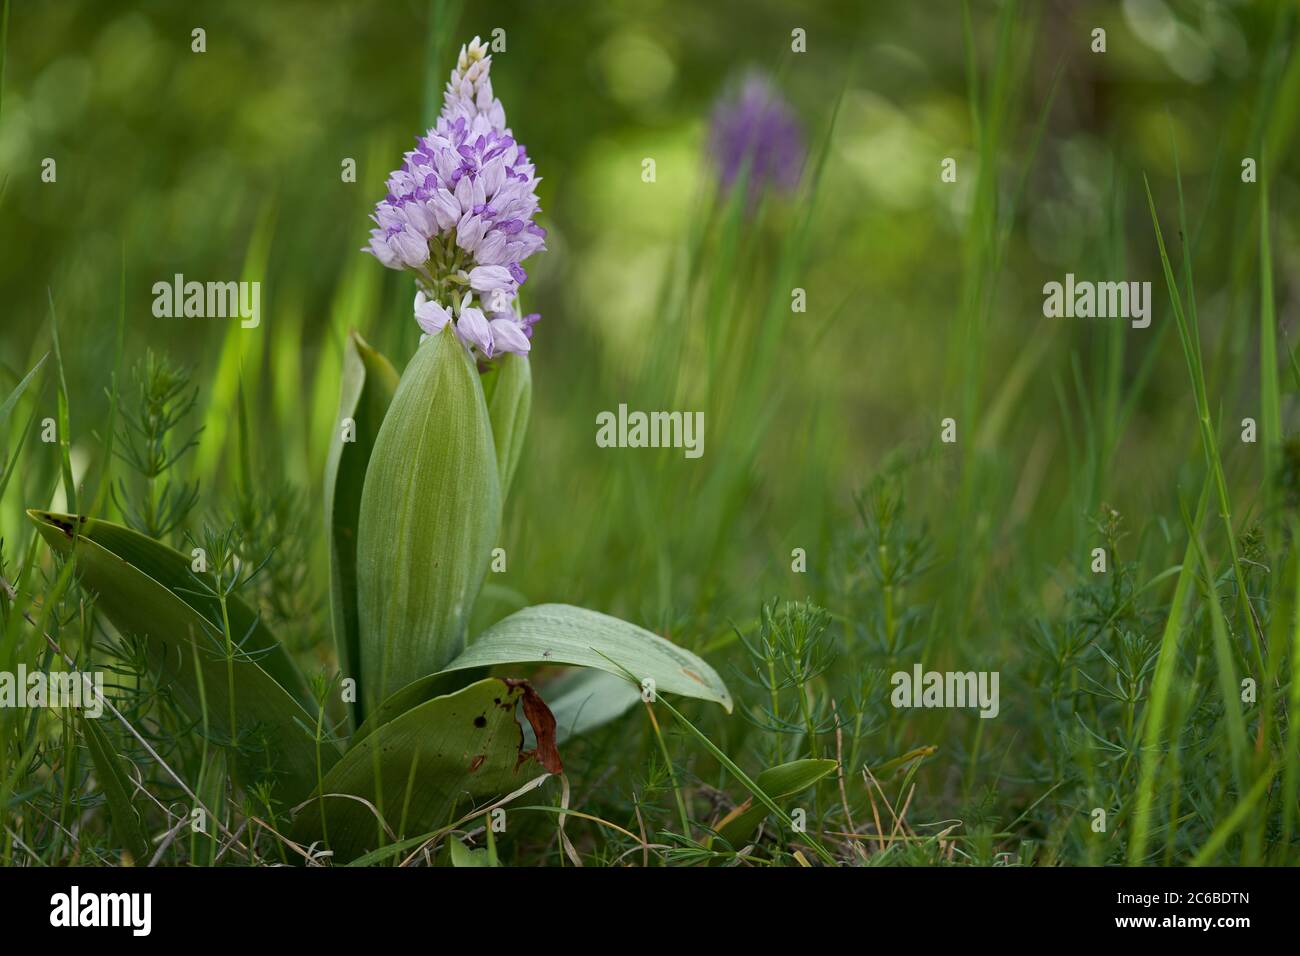 Flowering plant Orchis militaris in the spring in the meadow. Known as Military Orchid. Purple flower with large green leaves growing in the grass. Stock Photo